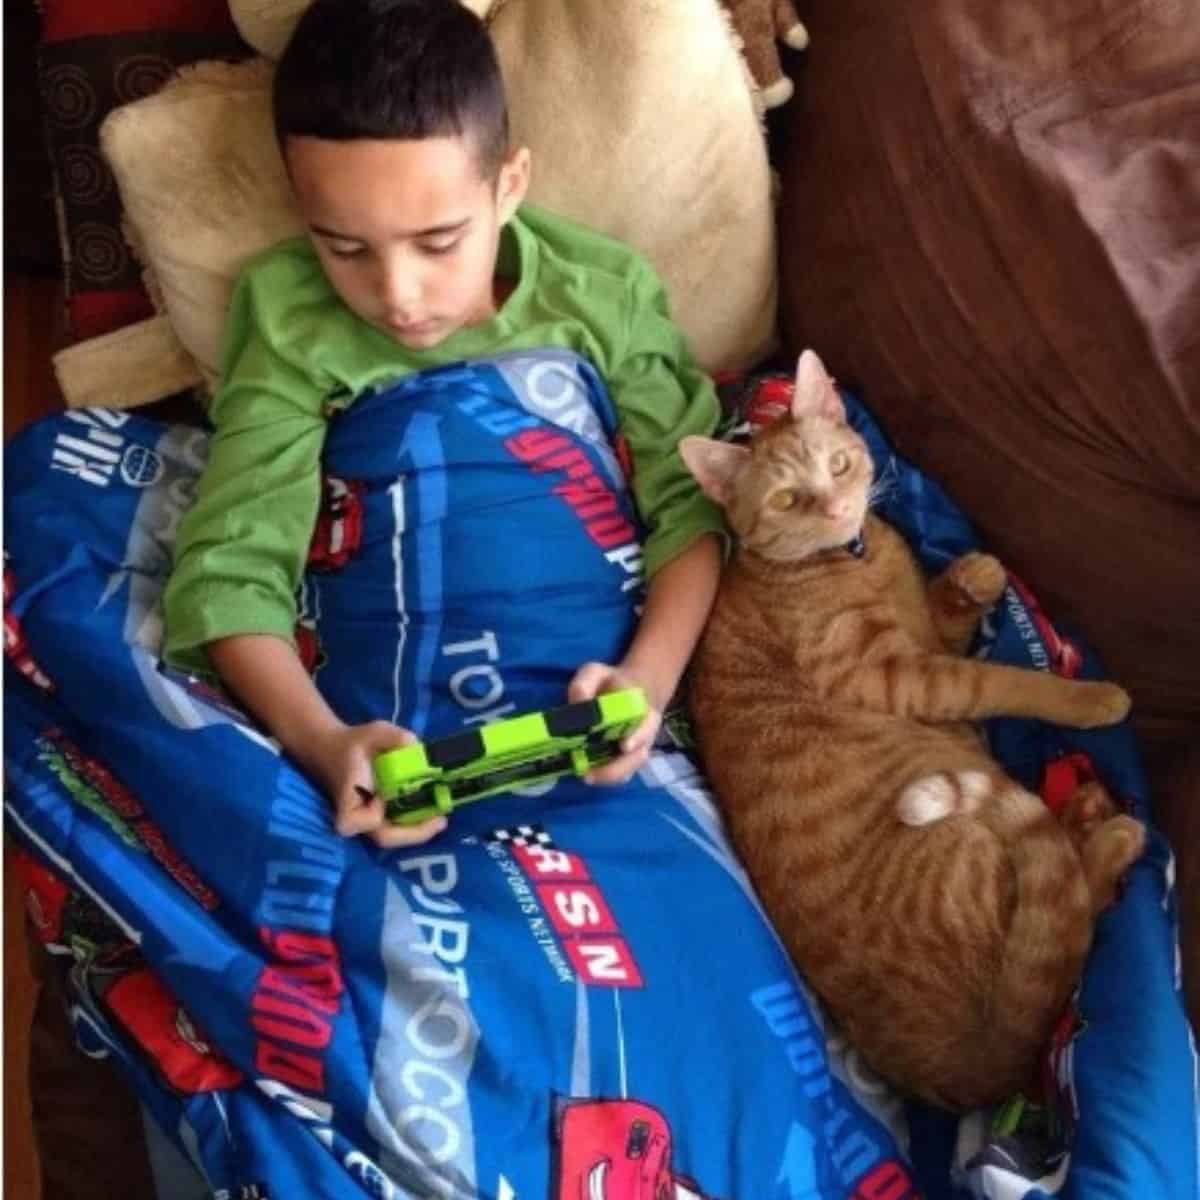 boy playing games with cat next to him